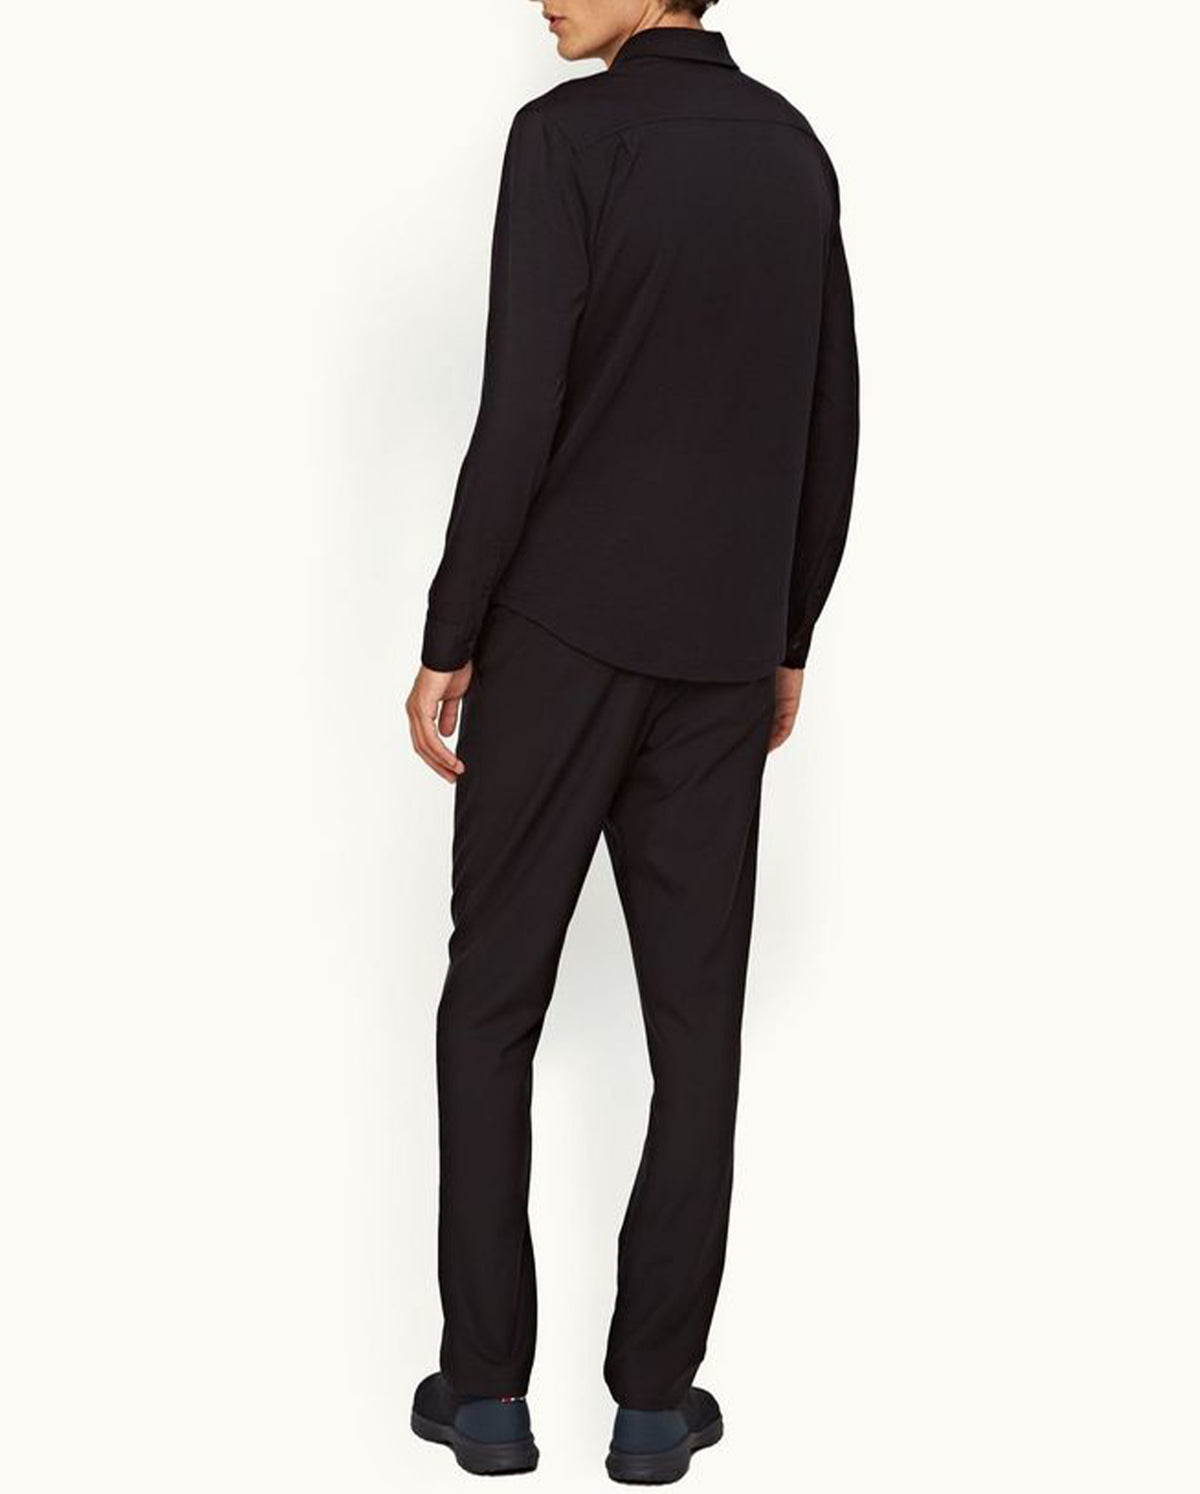 Cornell Tailored Fit Merino Trousers